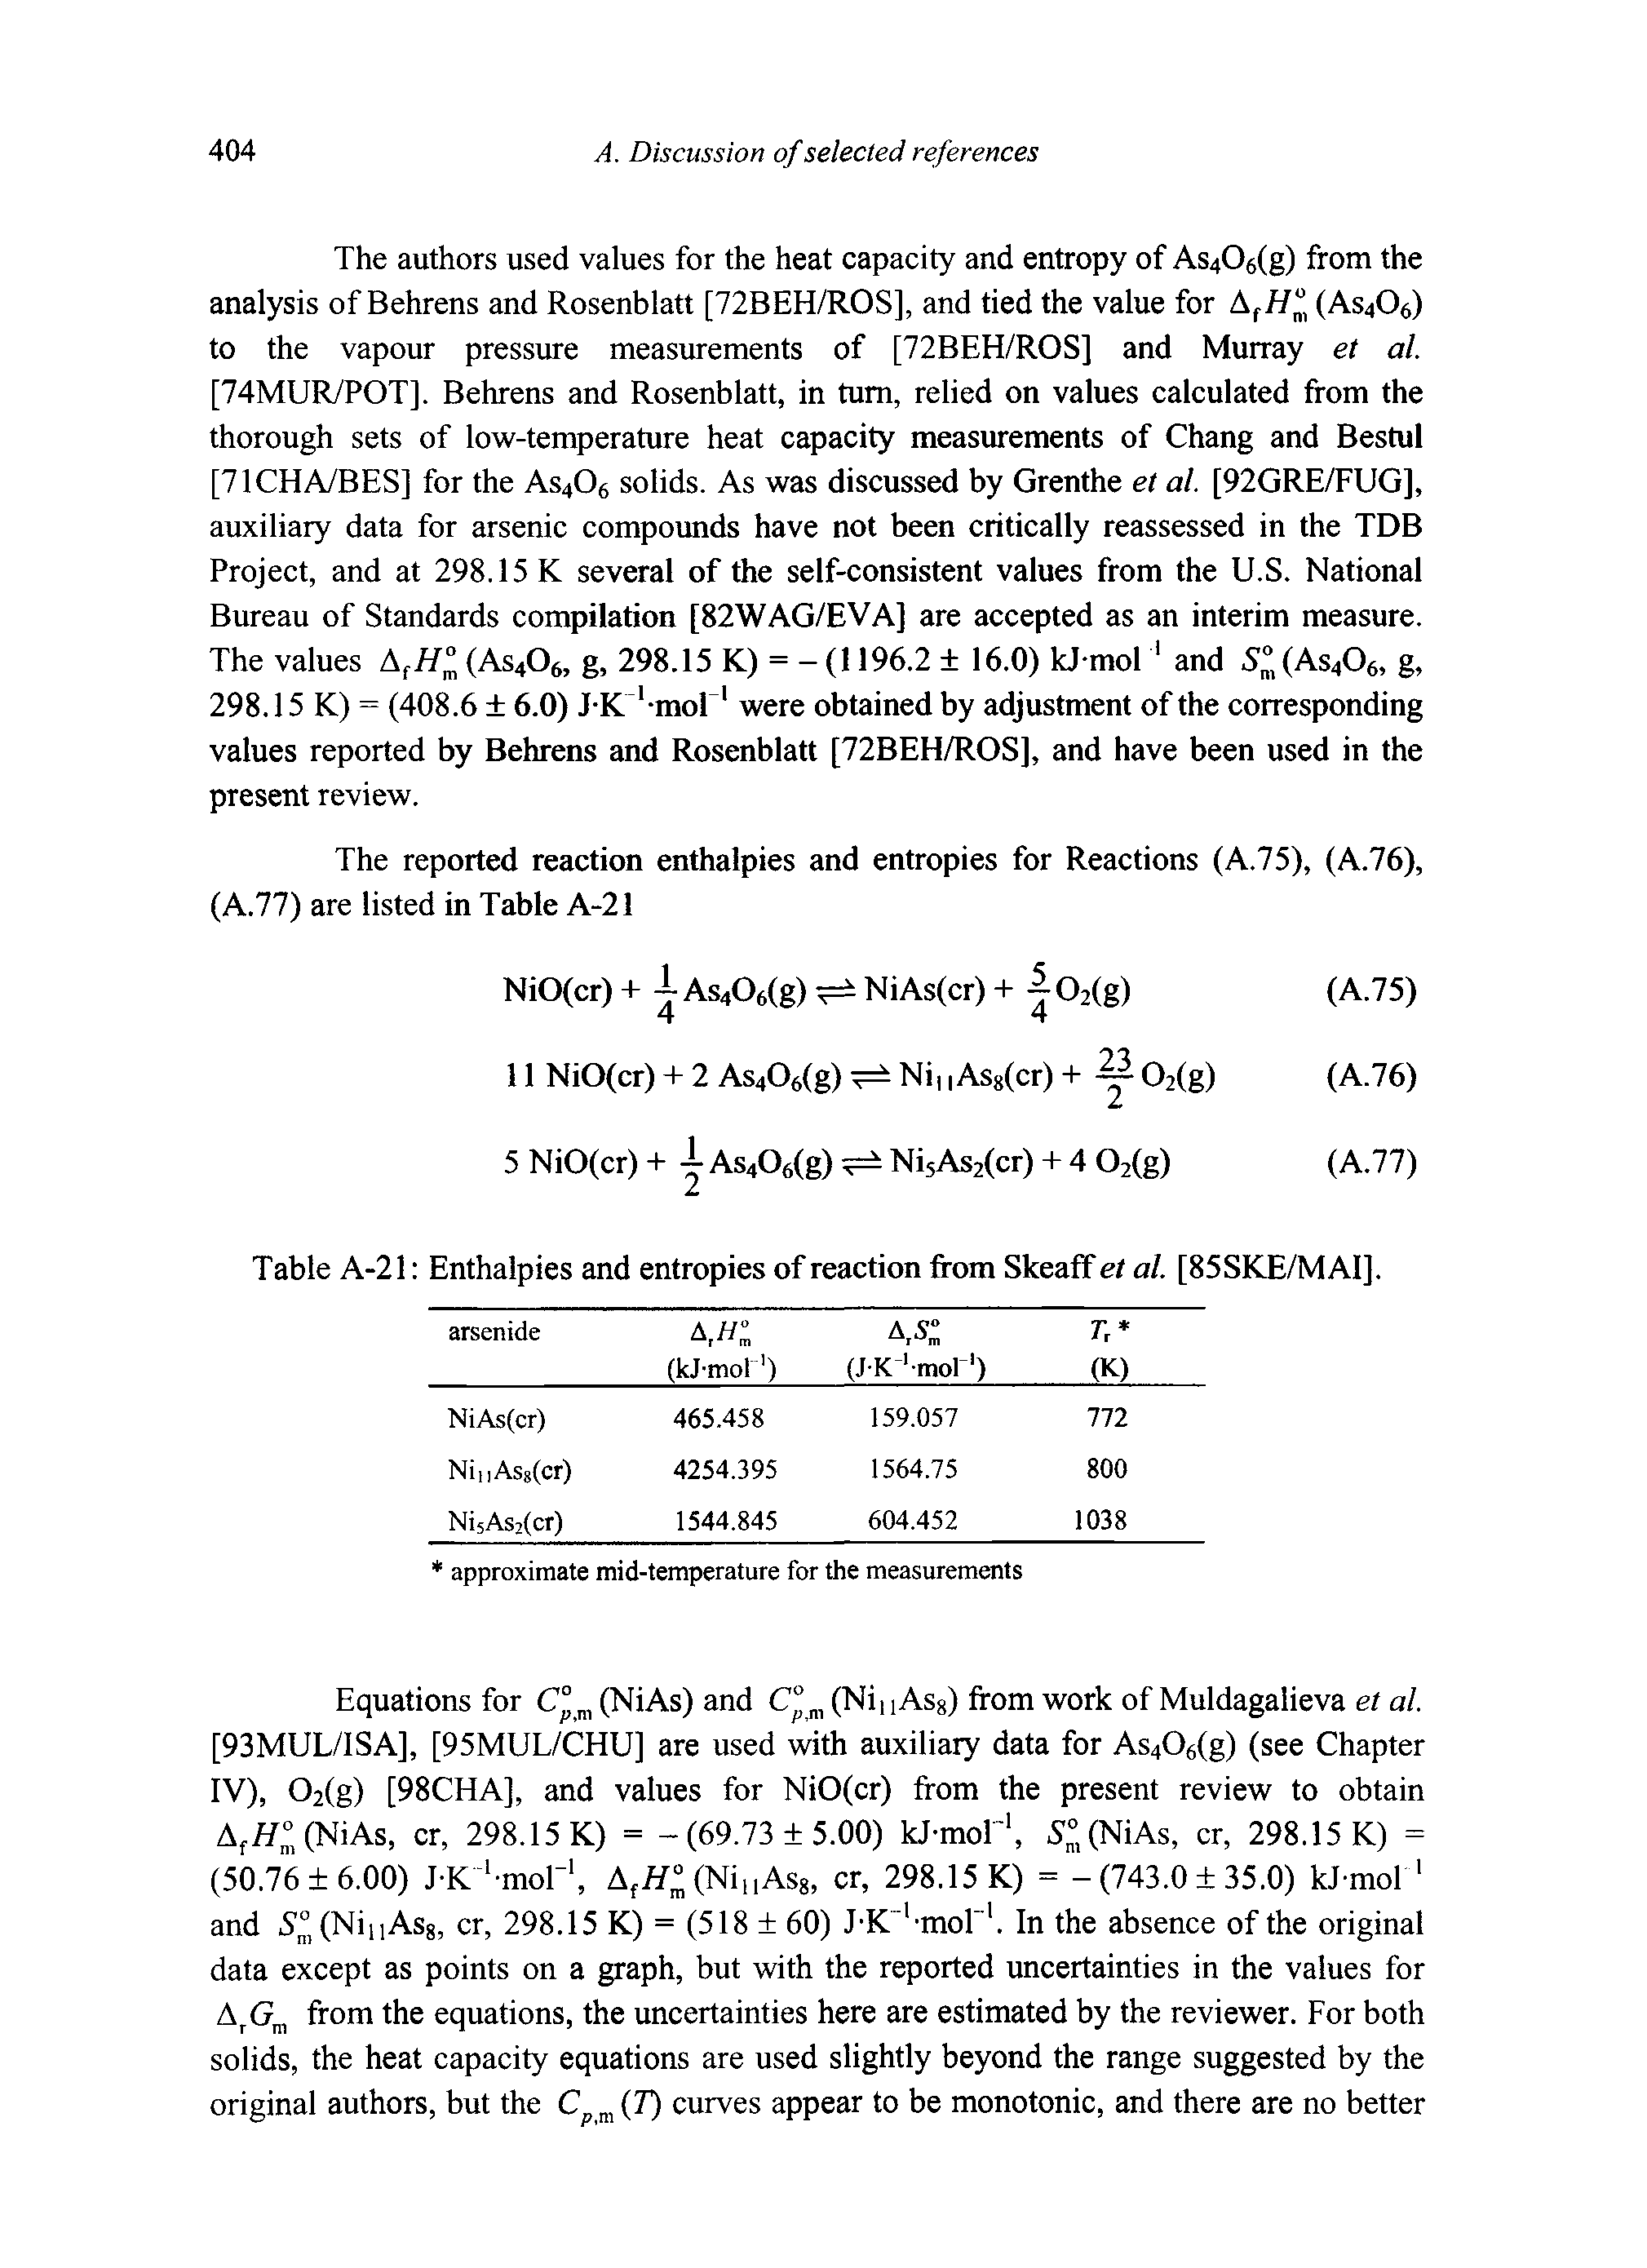 Table A-21 Enthalpies and entropies of reaction from Skeaflf et al. [85SKE/MAI].